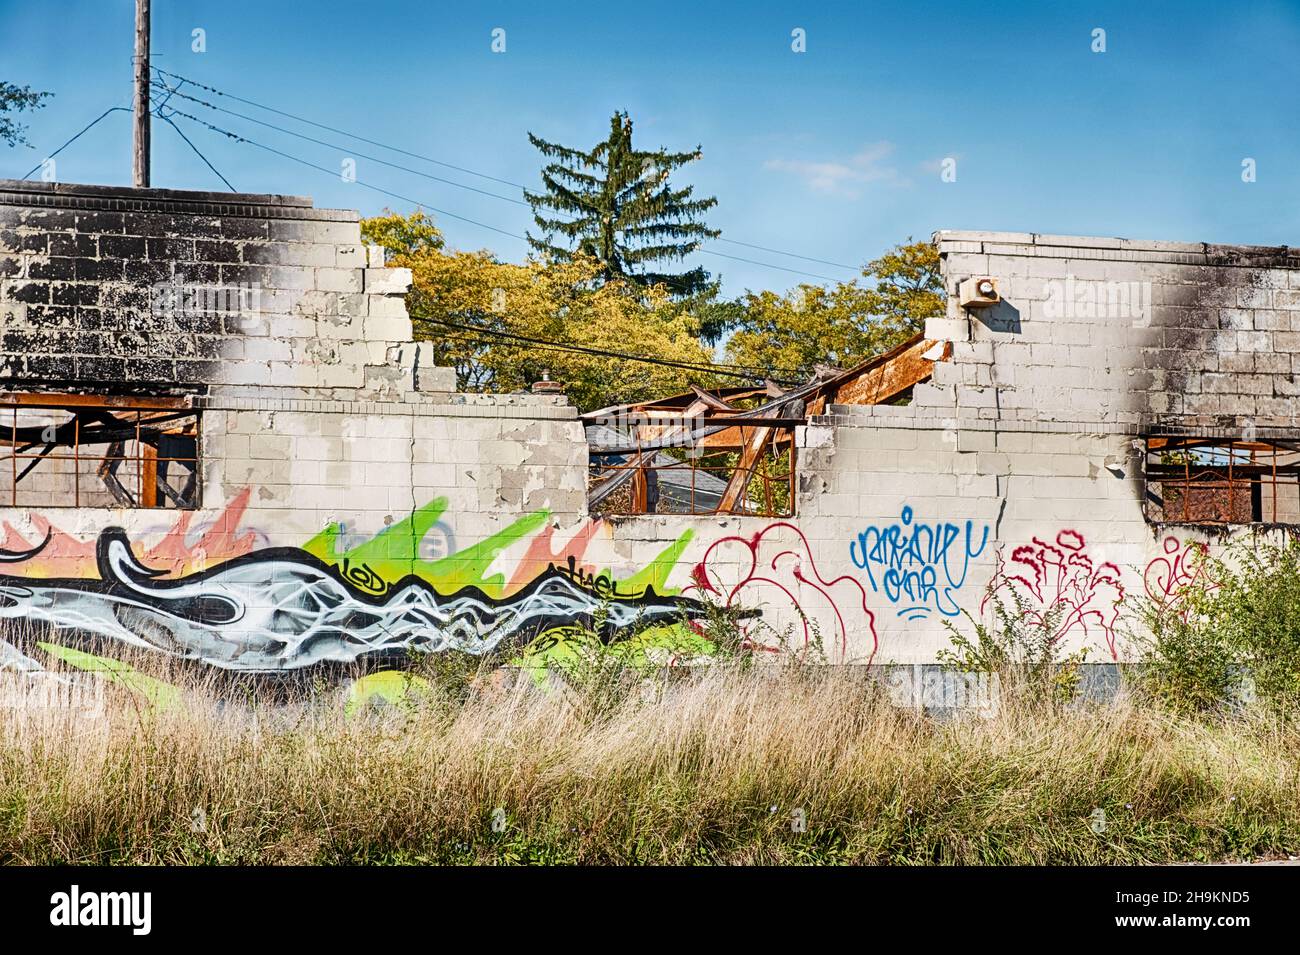 DETROIT, USA - OCTOBER 20, 2019: A wall of an old warehouse in the Highland Park area of Detroit has been demolished and vandalized with graffiti. Stock Photo